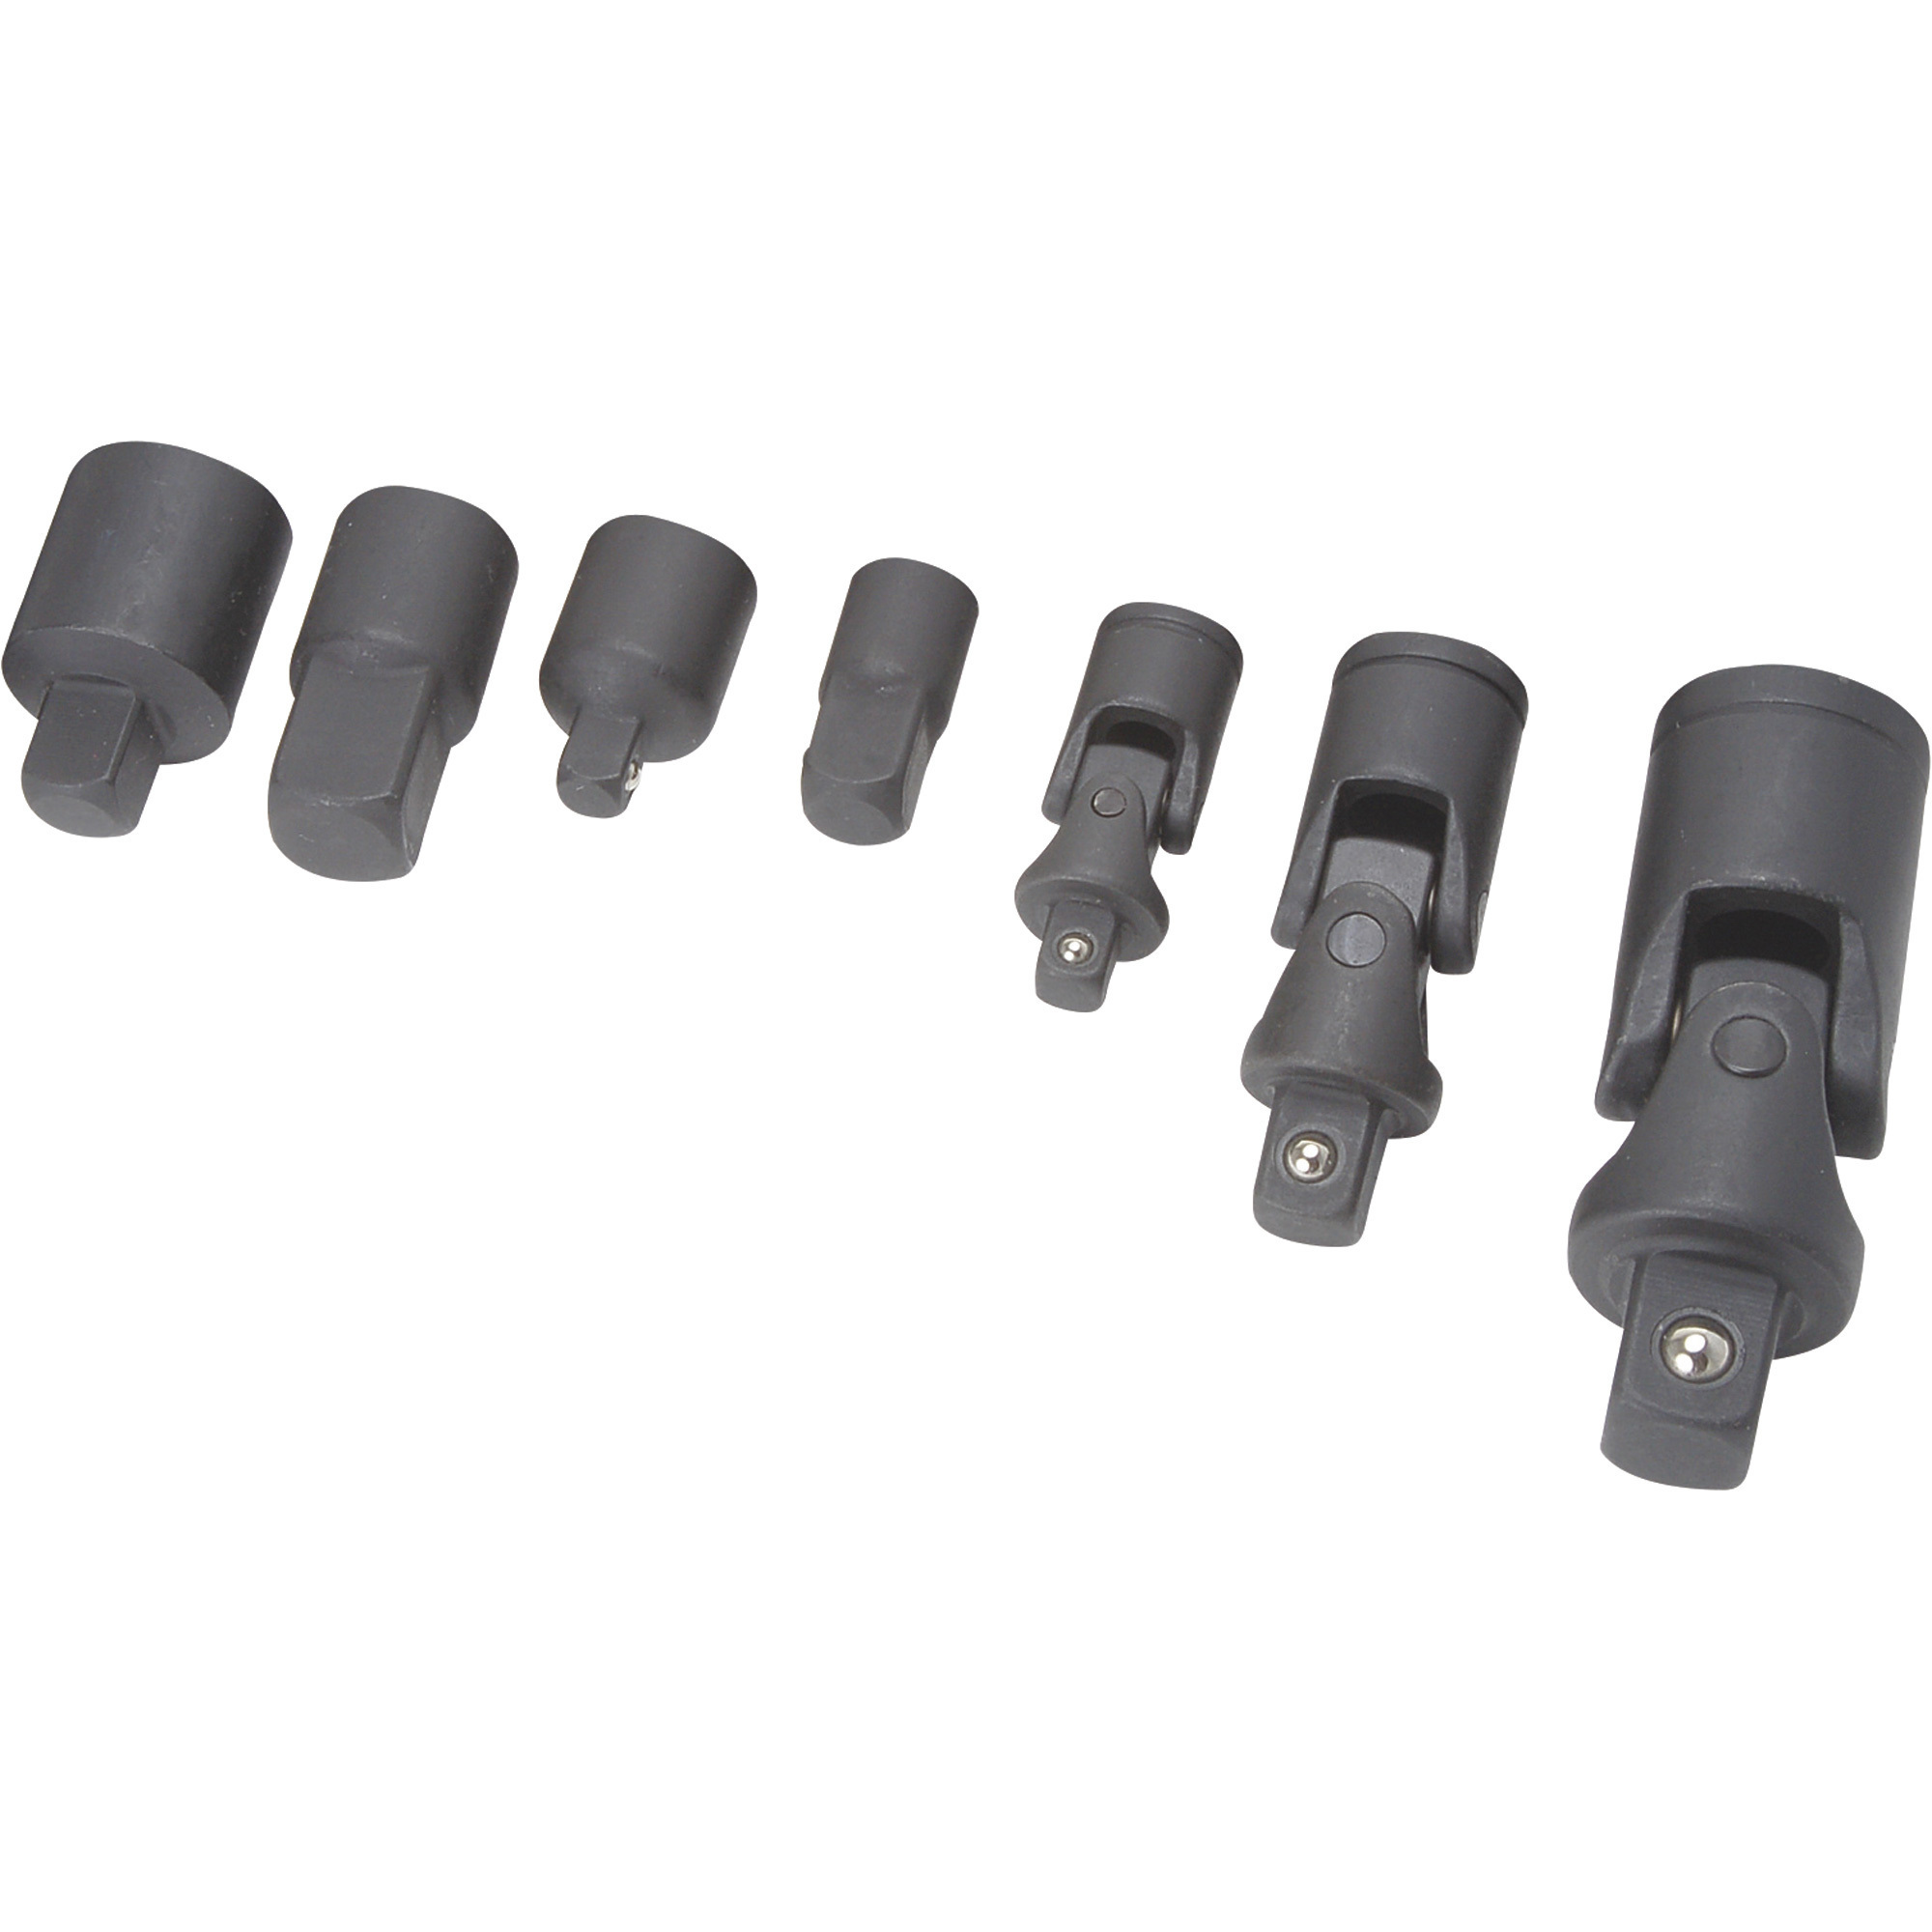 Titan Adapters and U-Joints, 7-Piece Set, Model 17407